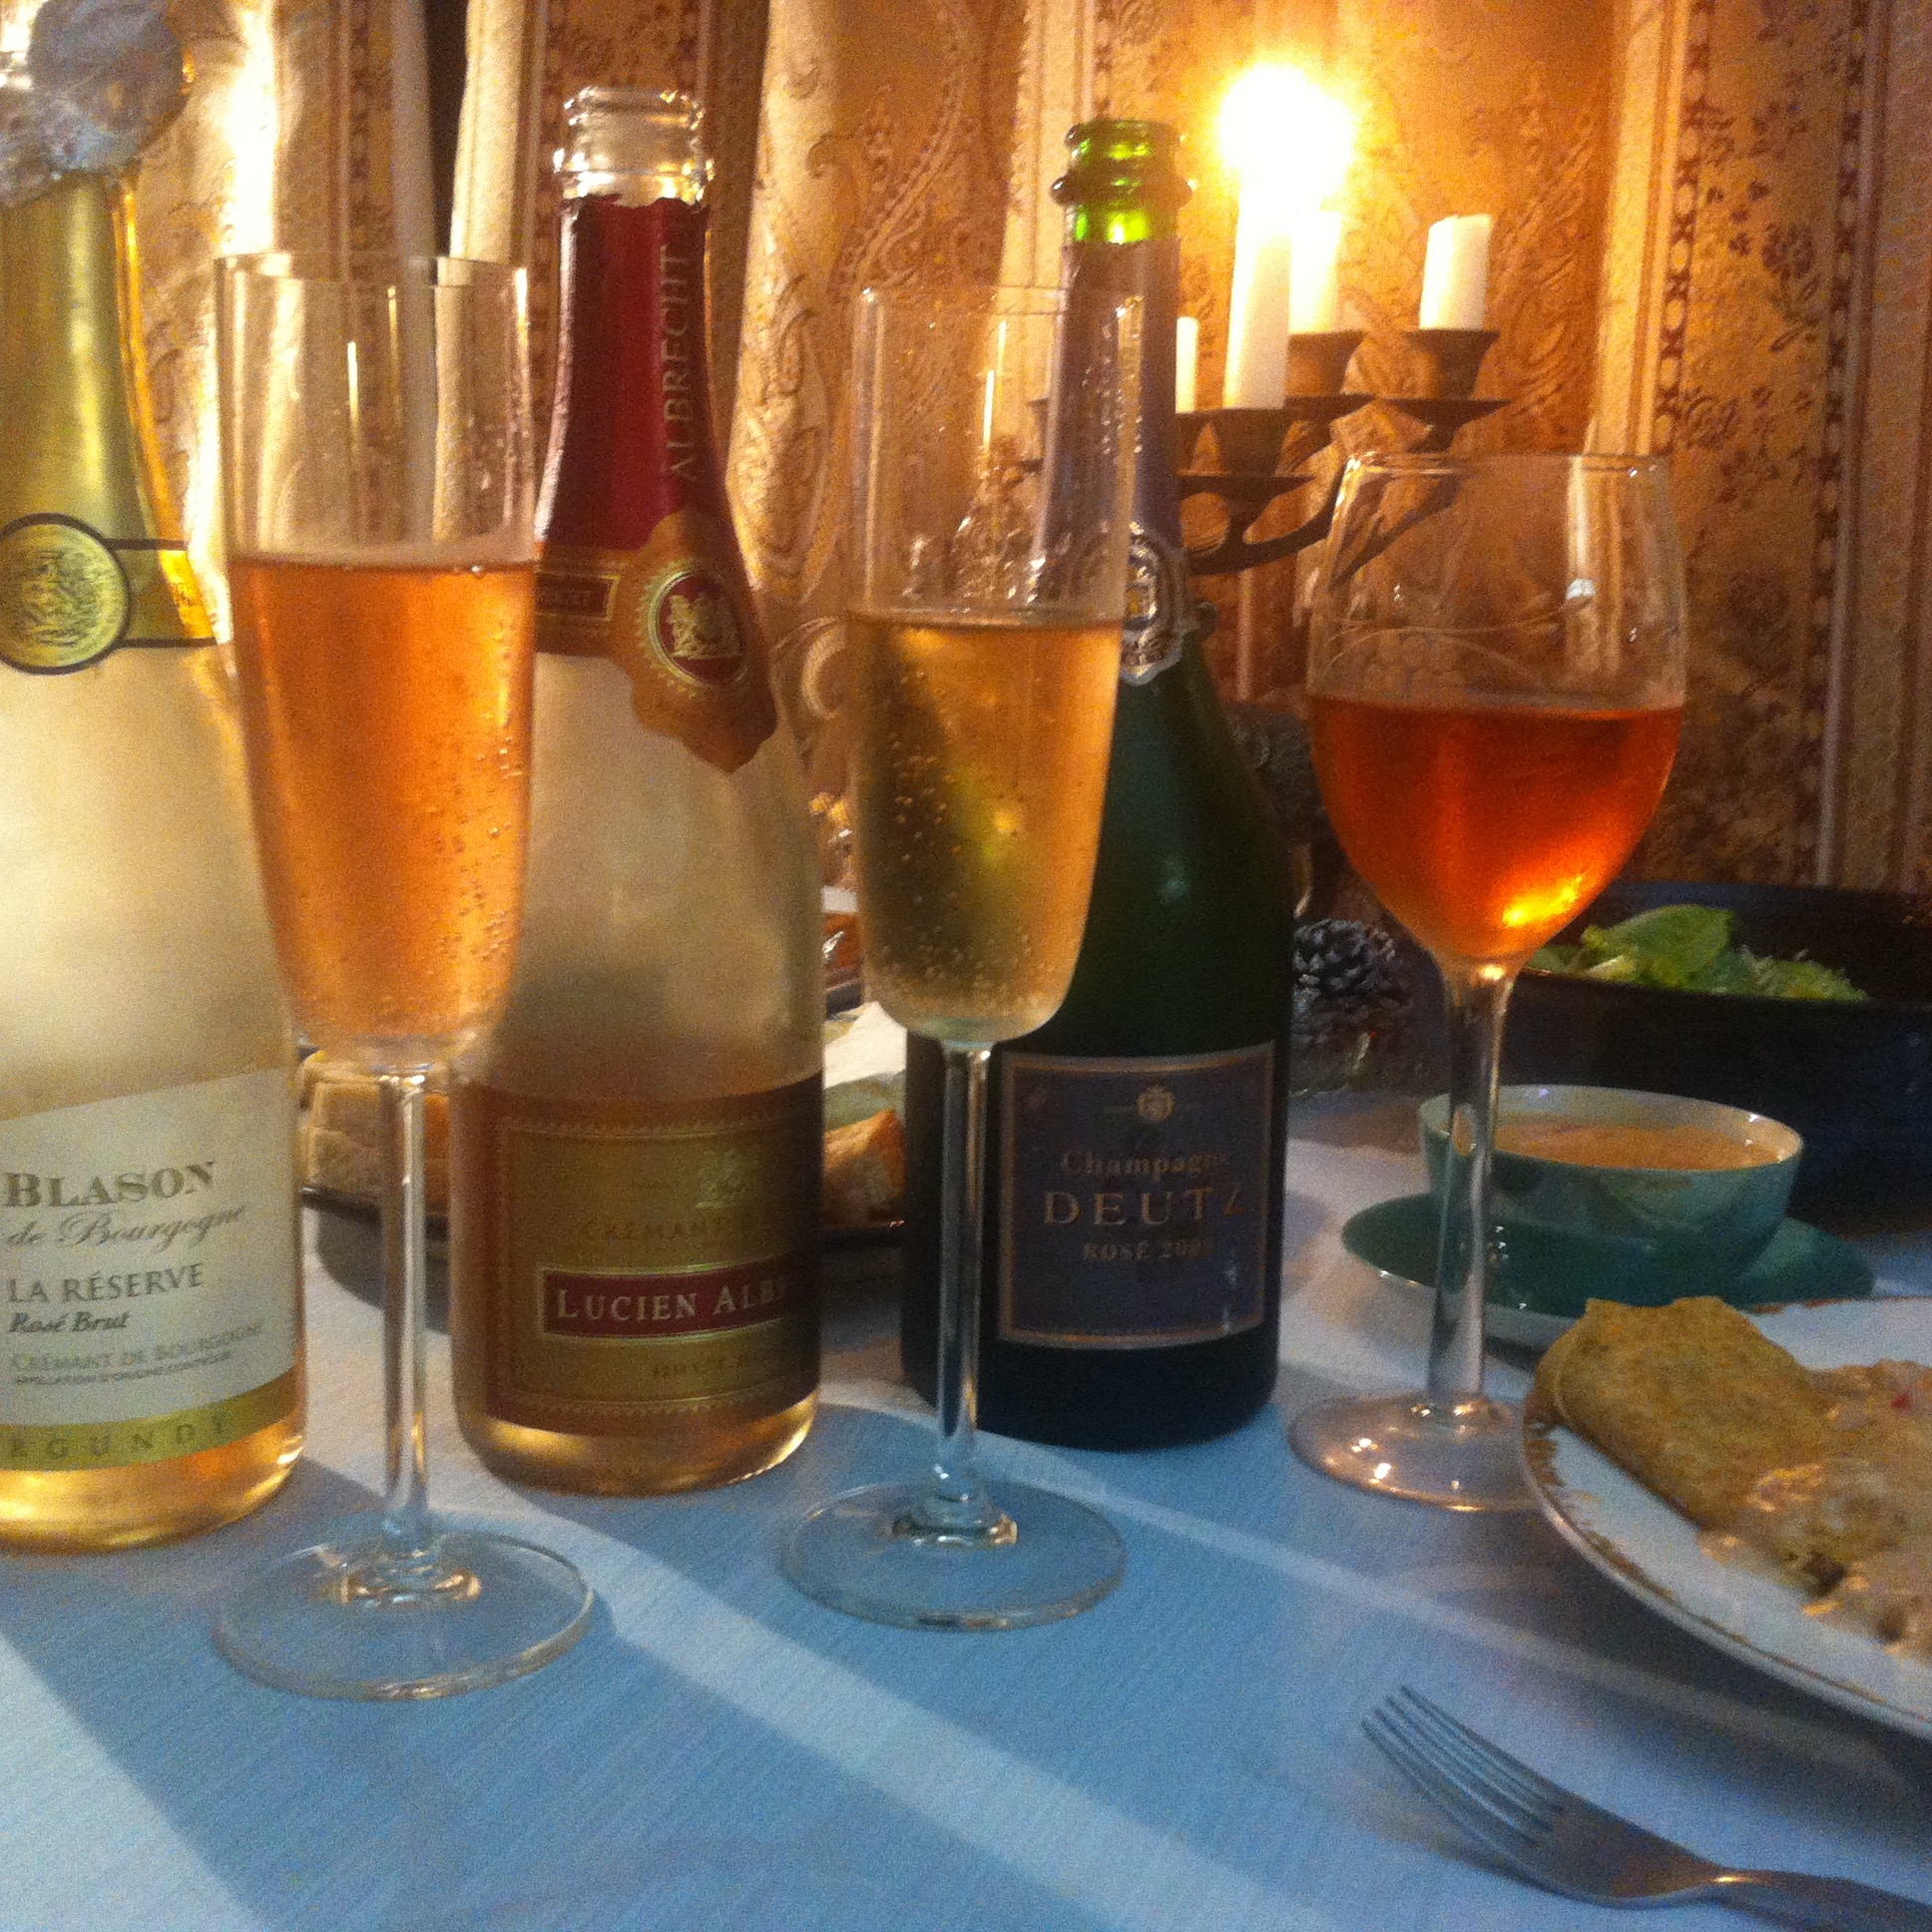 French Fizz #Winophiles: In the Pink with Fresh Seafood Crepes, Bisque |  wine predator.............. gwendolyn alley